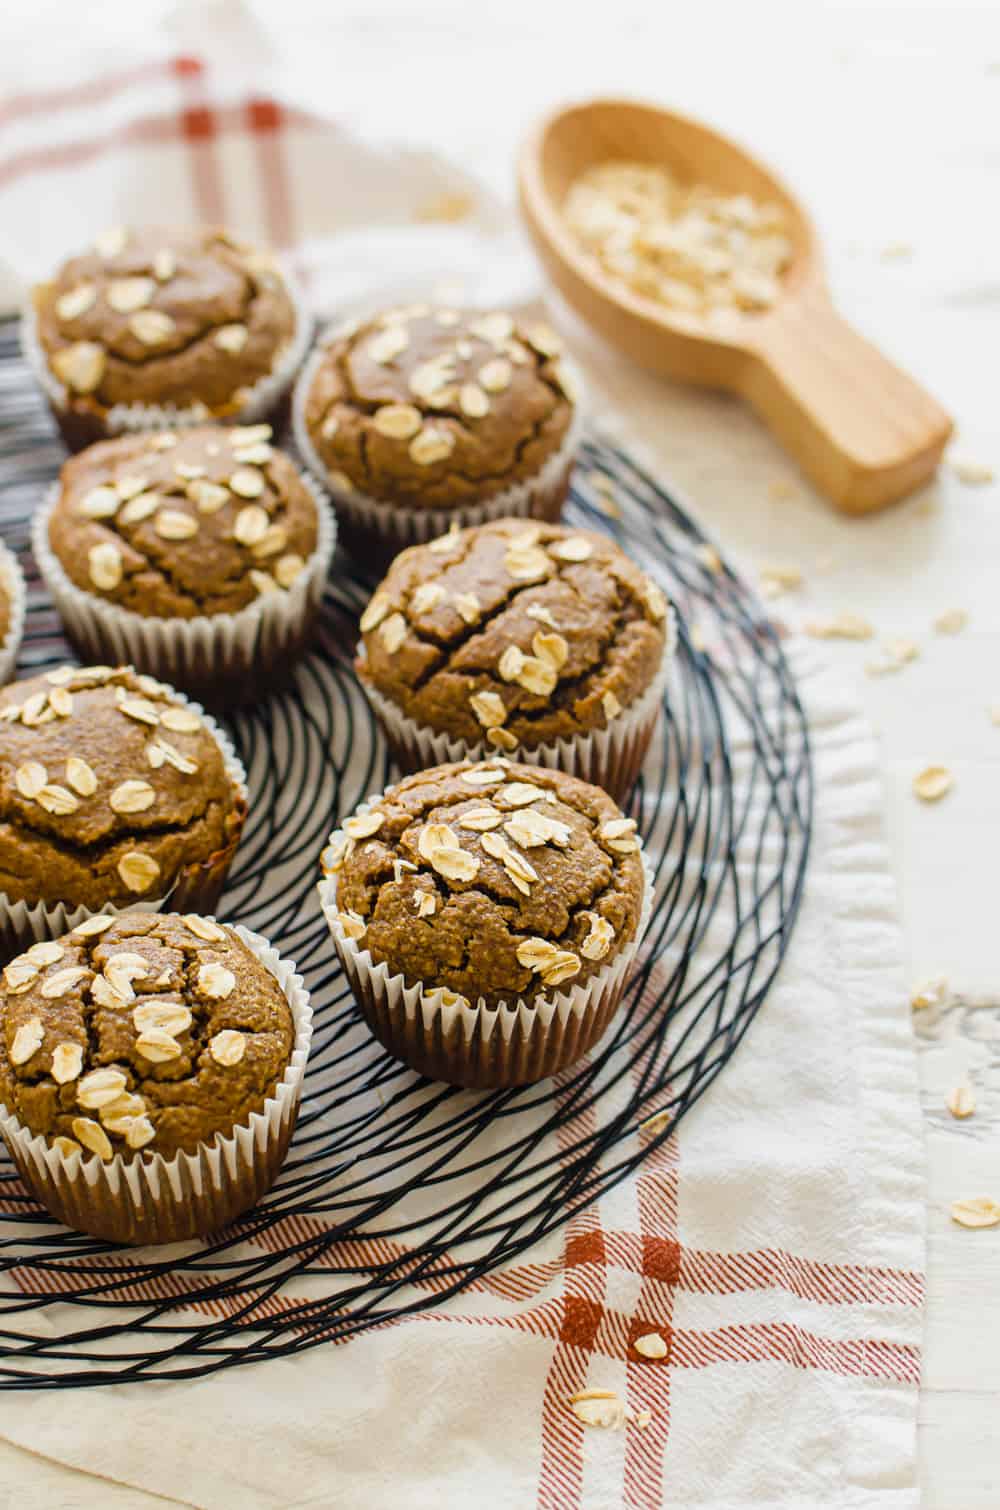 Gluten-free banana muffins with oats on top lined up on a wire platter.